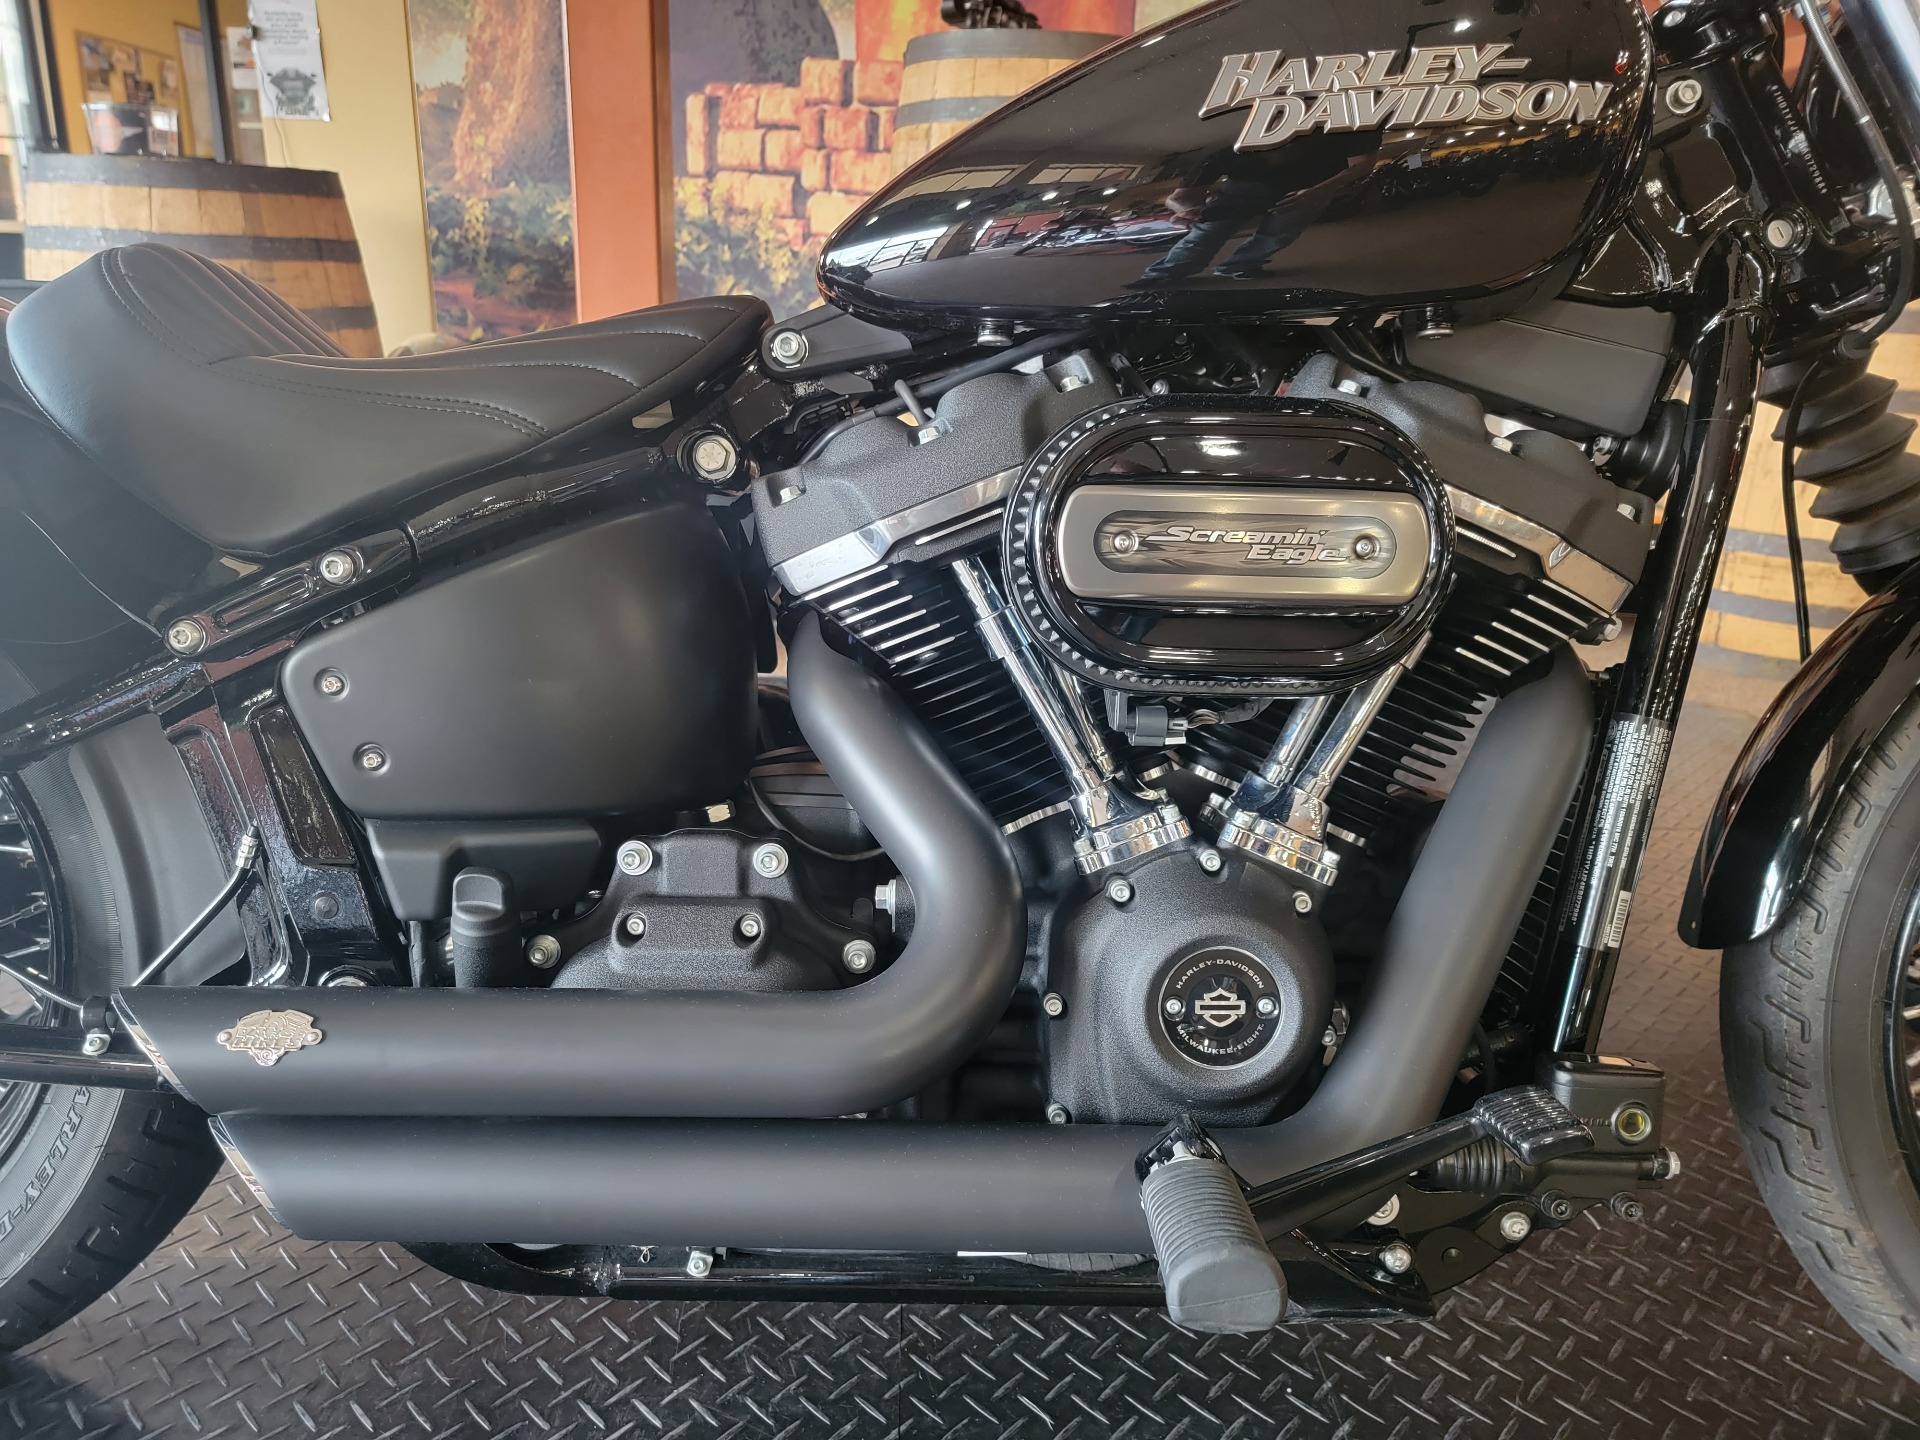 2019 Harley-Davidson Street Bob® in Knoxville, Tennessee - Photo 2